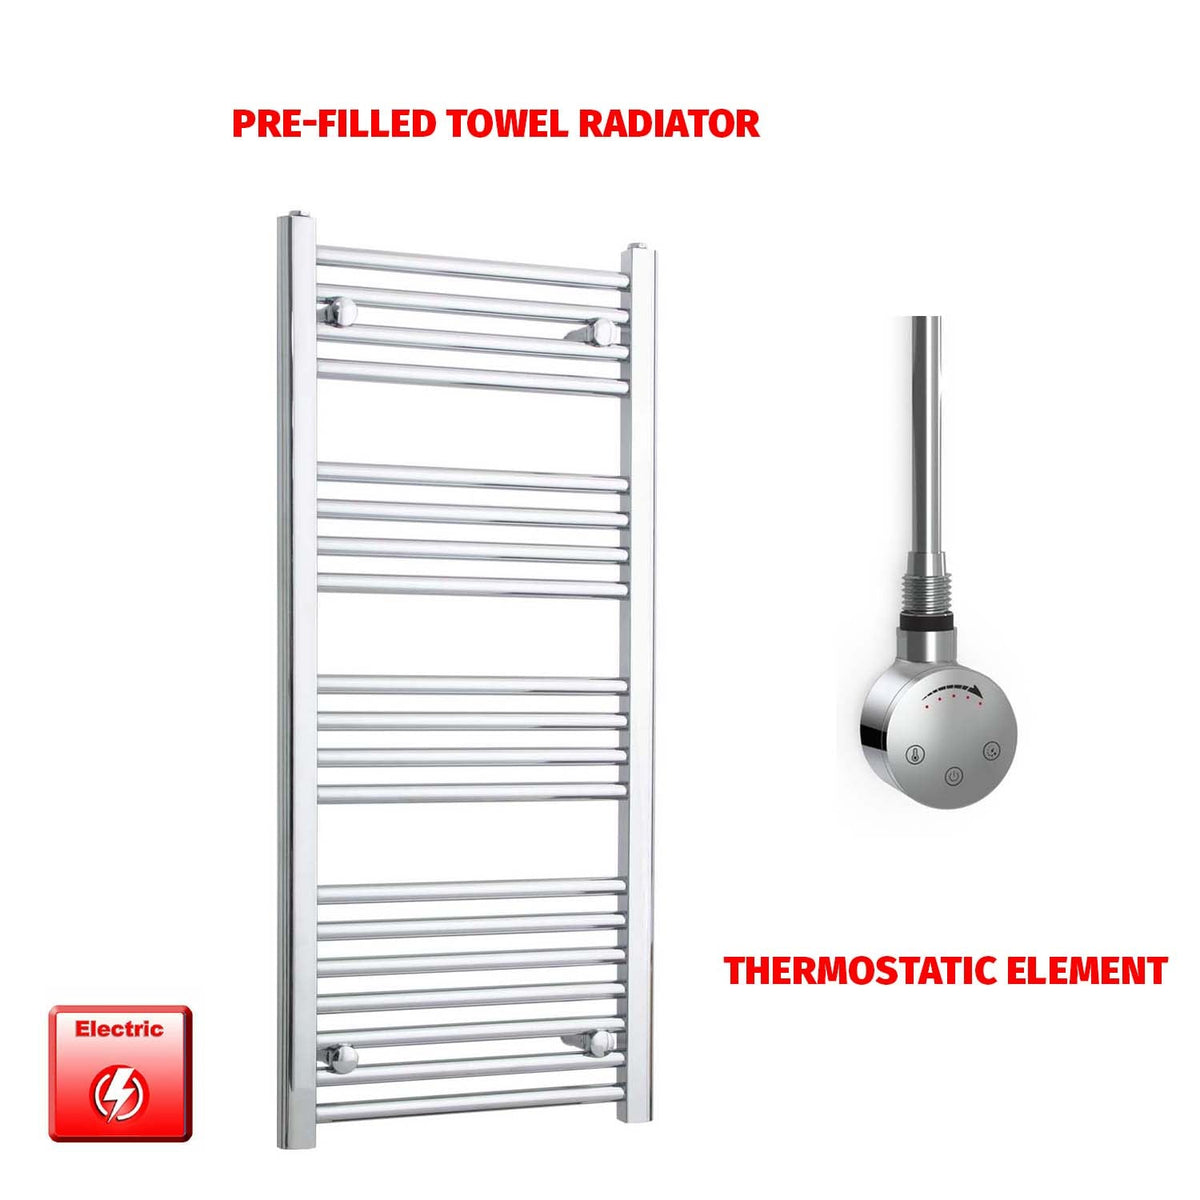 1000mm High 450mm Wide Pre-Filled Electric Heated Towel Radiator Straight Chrome SMR Thermostatic element no timer